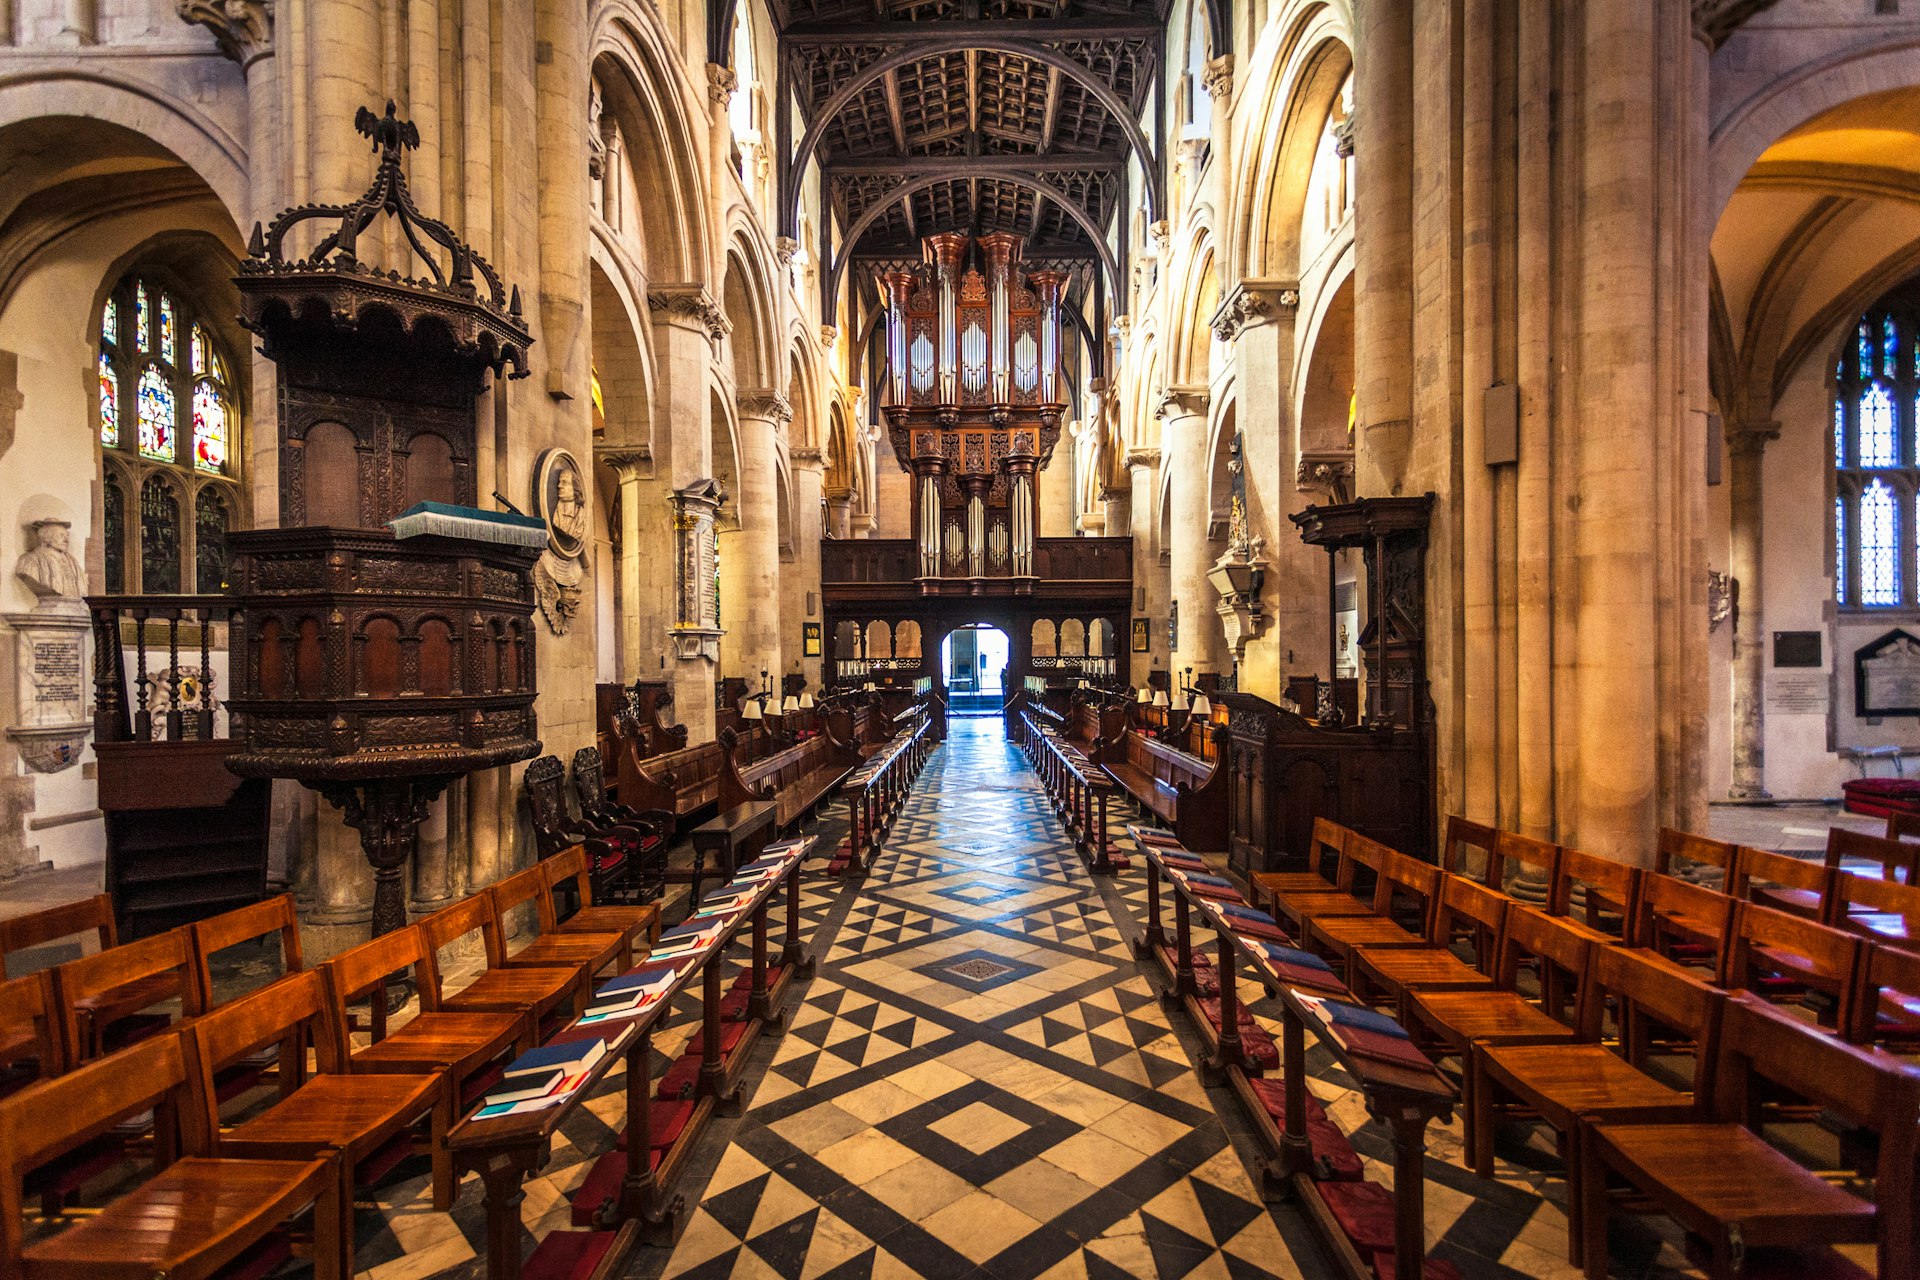 The grand interior of Christ Church Cathedral in Oxford, England. Pews line the walls of the ancient building.